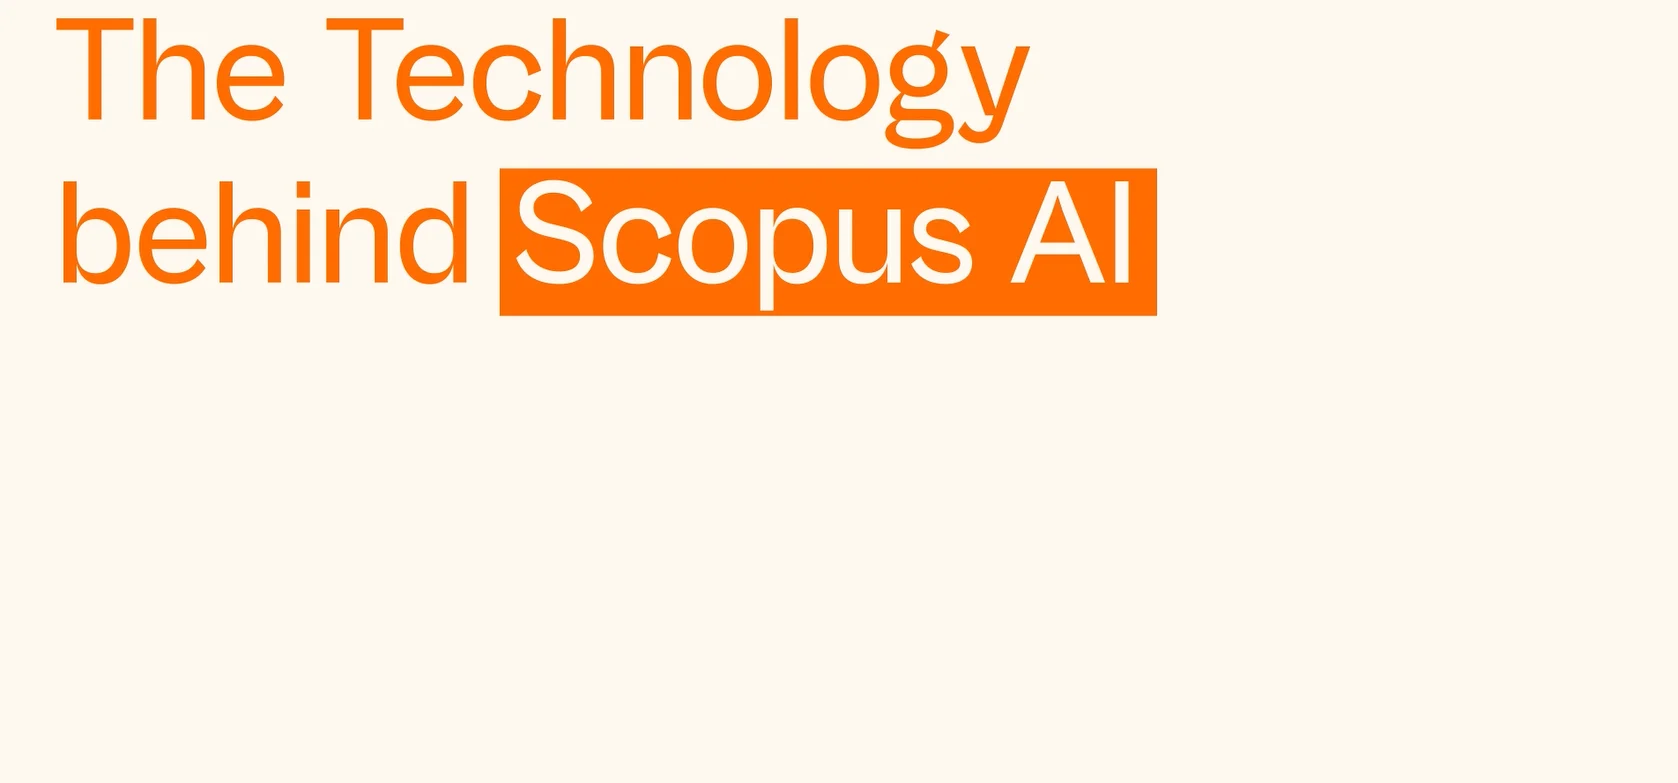 The technology behind Scopus AI